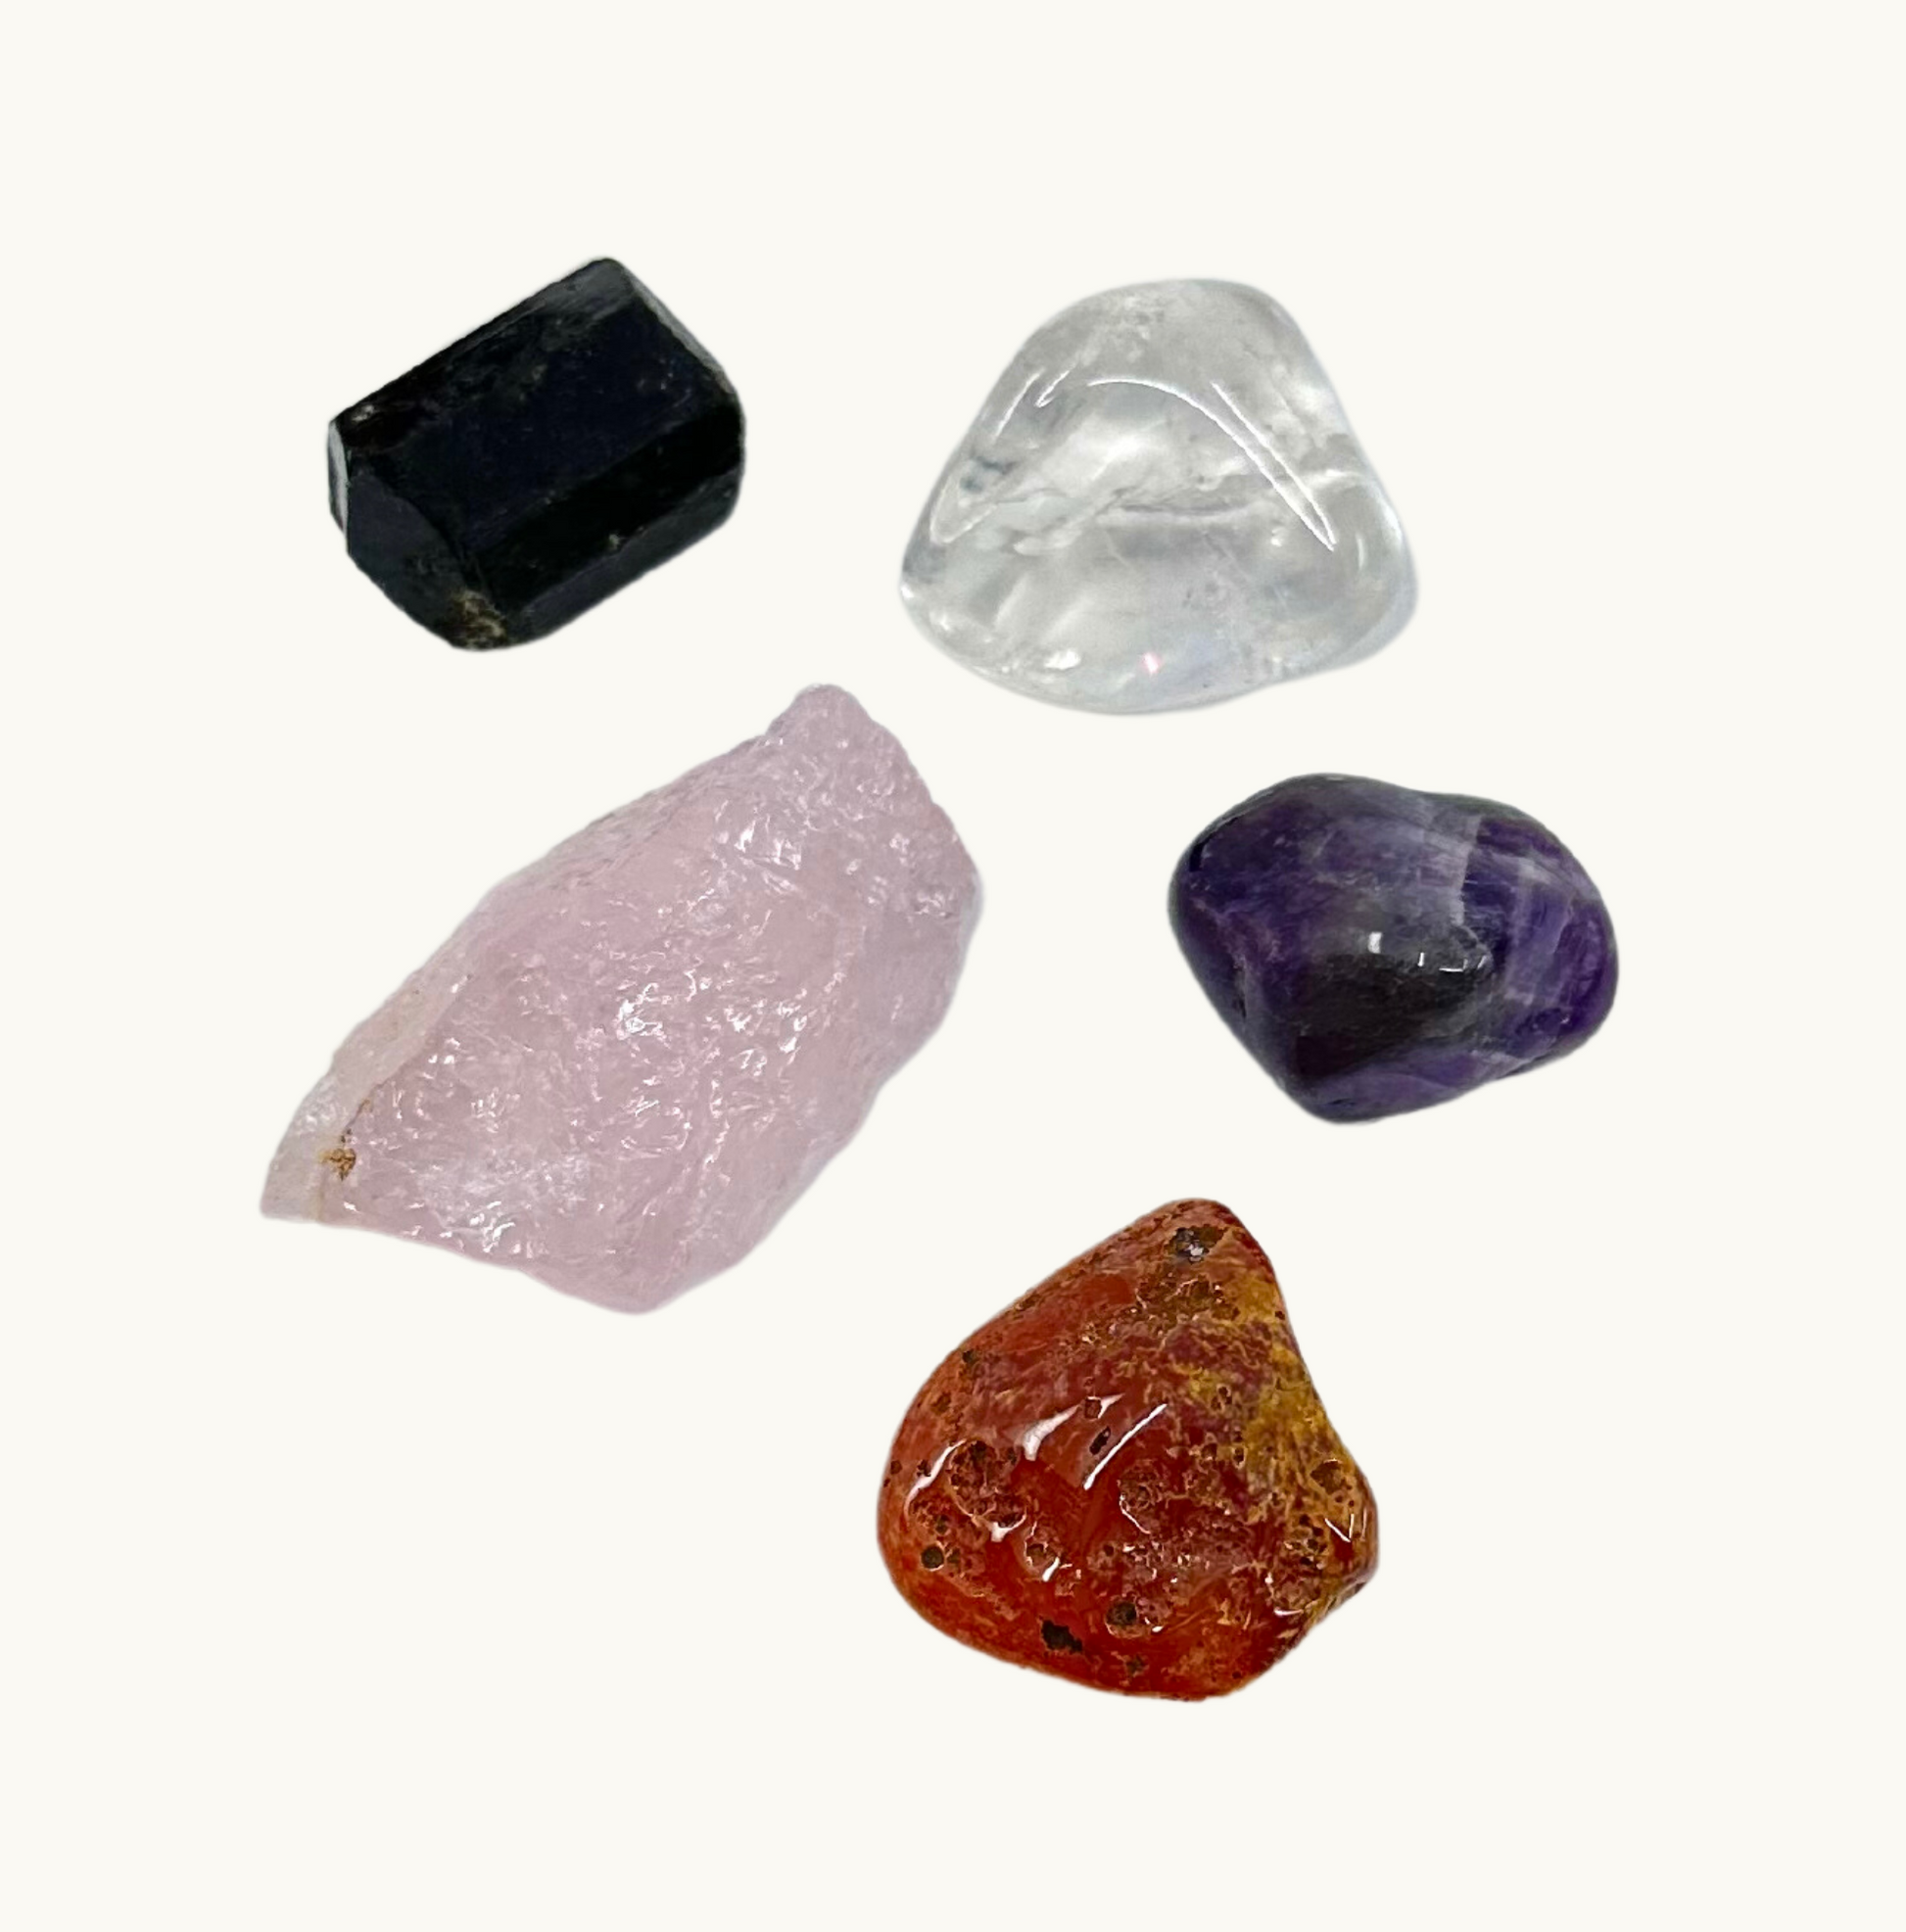 Magical Crystal Kit for Kids: Includes Amethyst, Rose Quartz, Clear Quartz, Black Tourmaline, and Carnelian - A colorful assortment of crystals arranged on a vibrant background, inviting young explorers to embark on a journey of discovery and wonder. Perfect for children, parents, educators, and crystal enthusiasts.